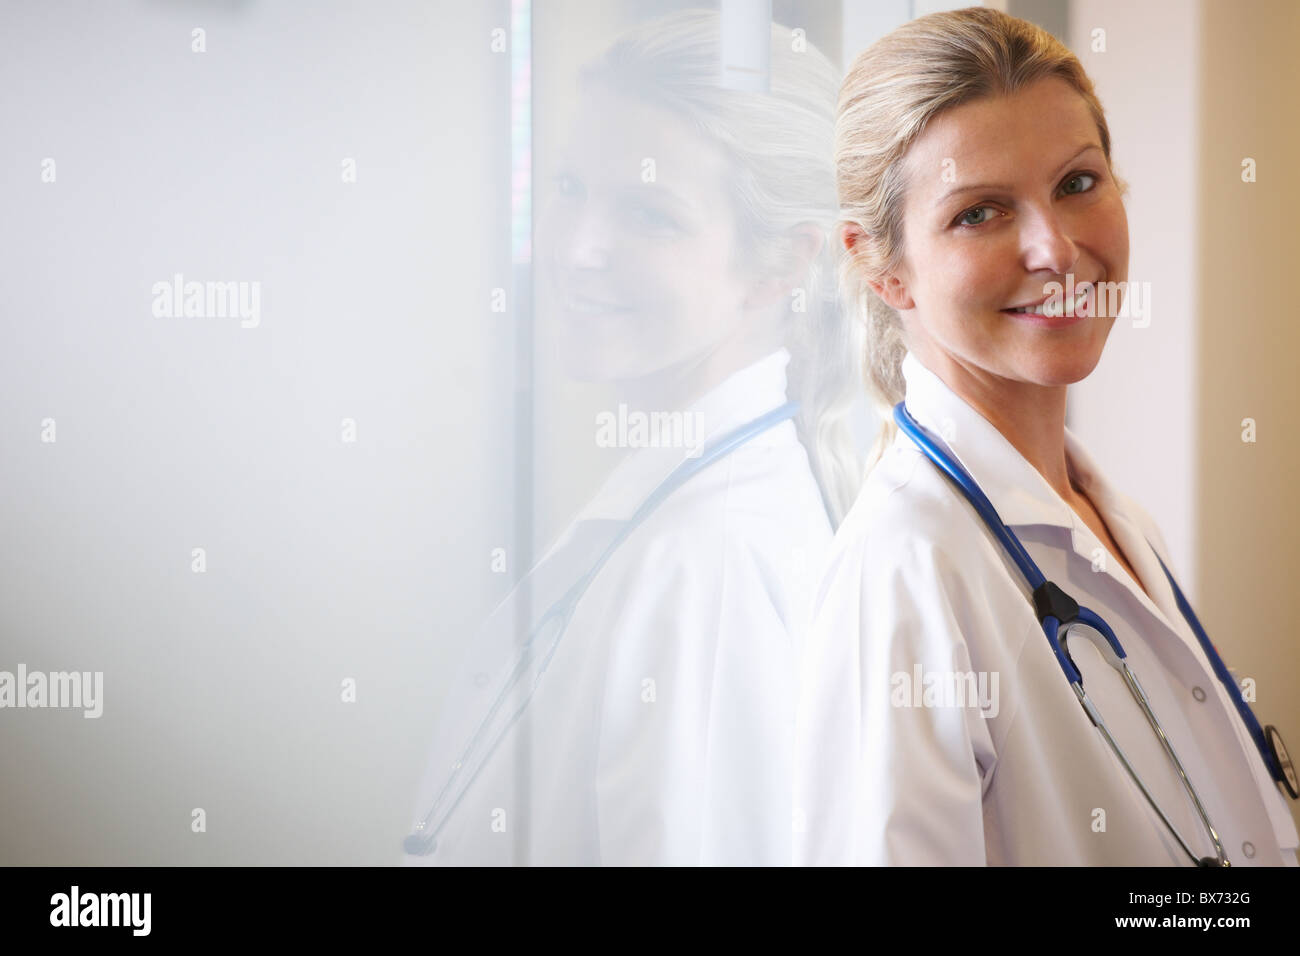 Doctor against a window, smiling Stock Photo